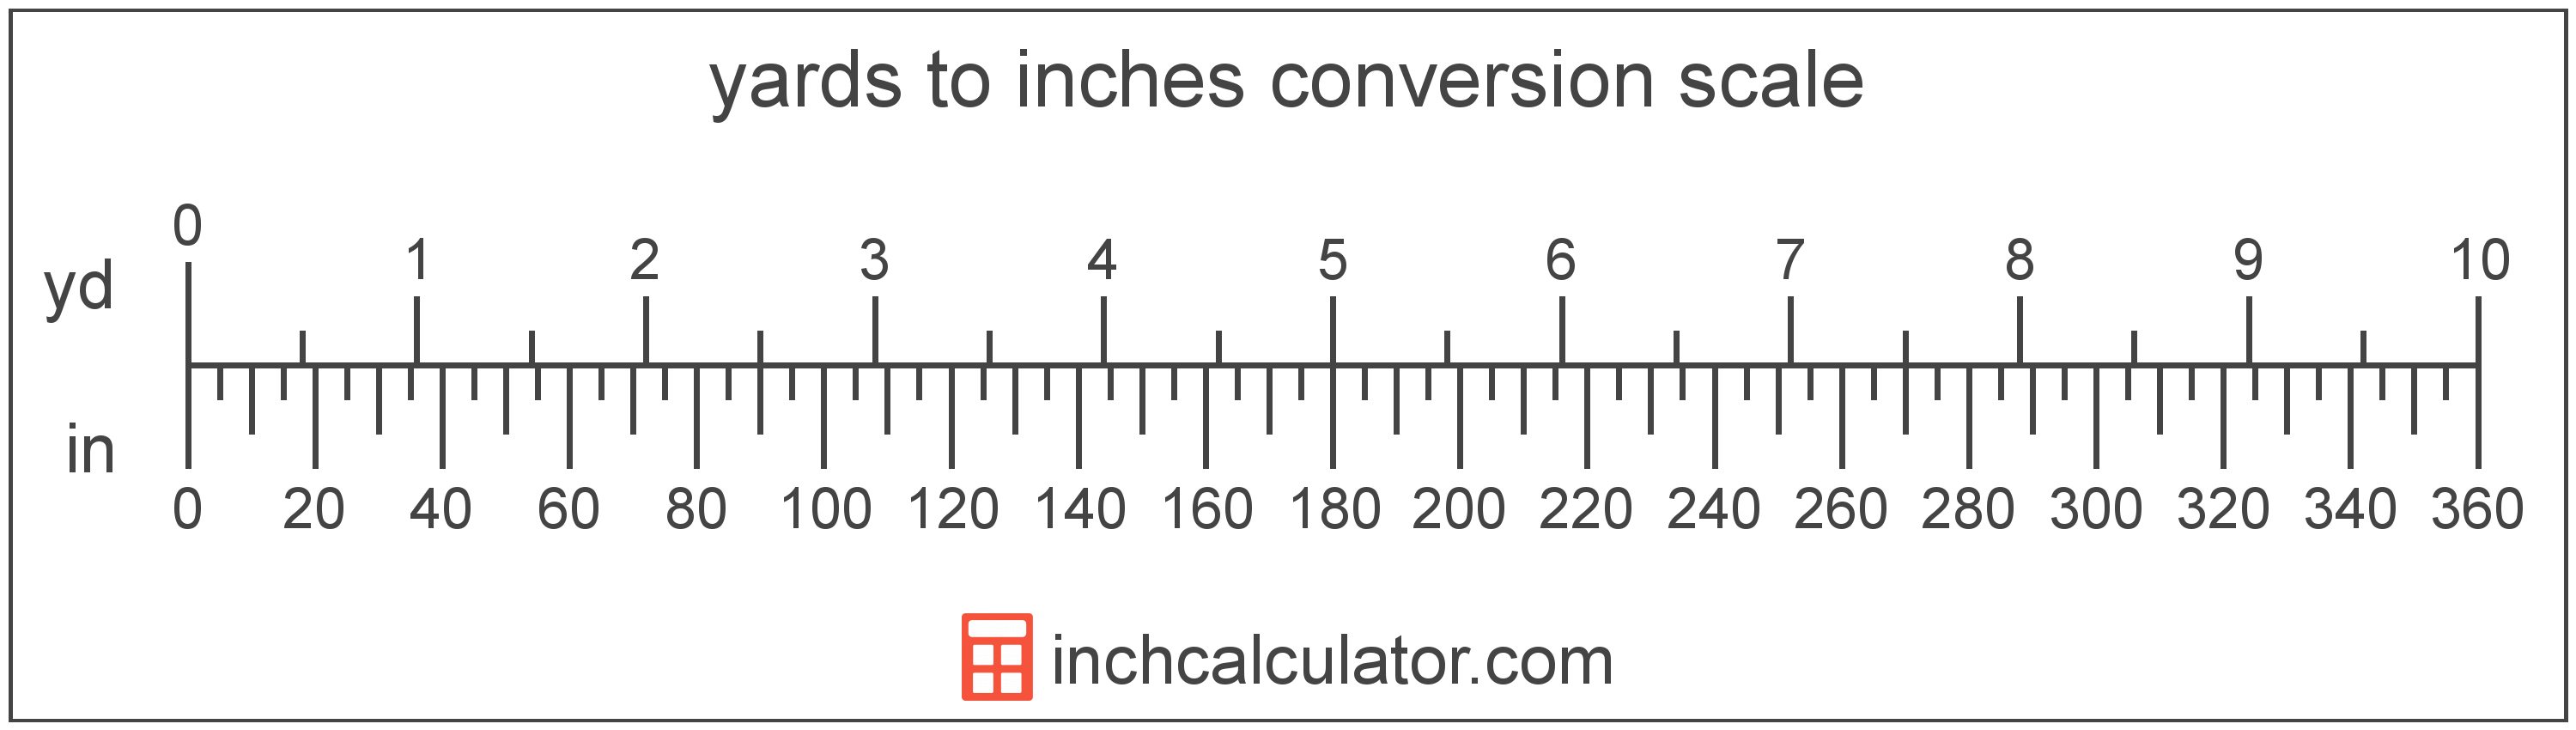 Feet Into Yards Conversion Chart